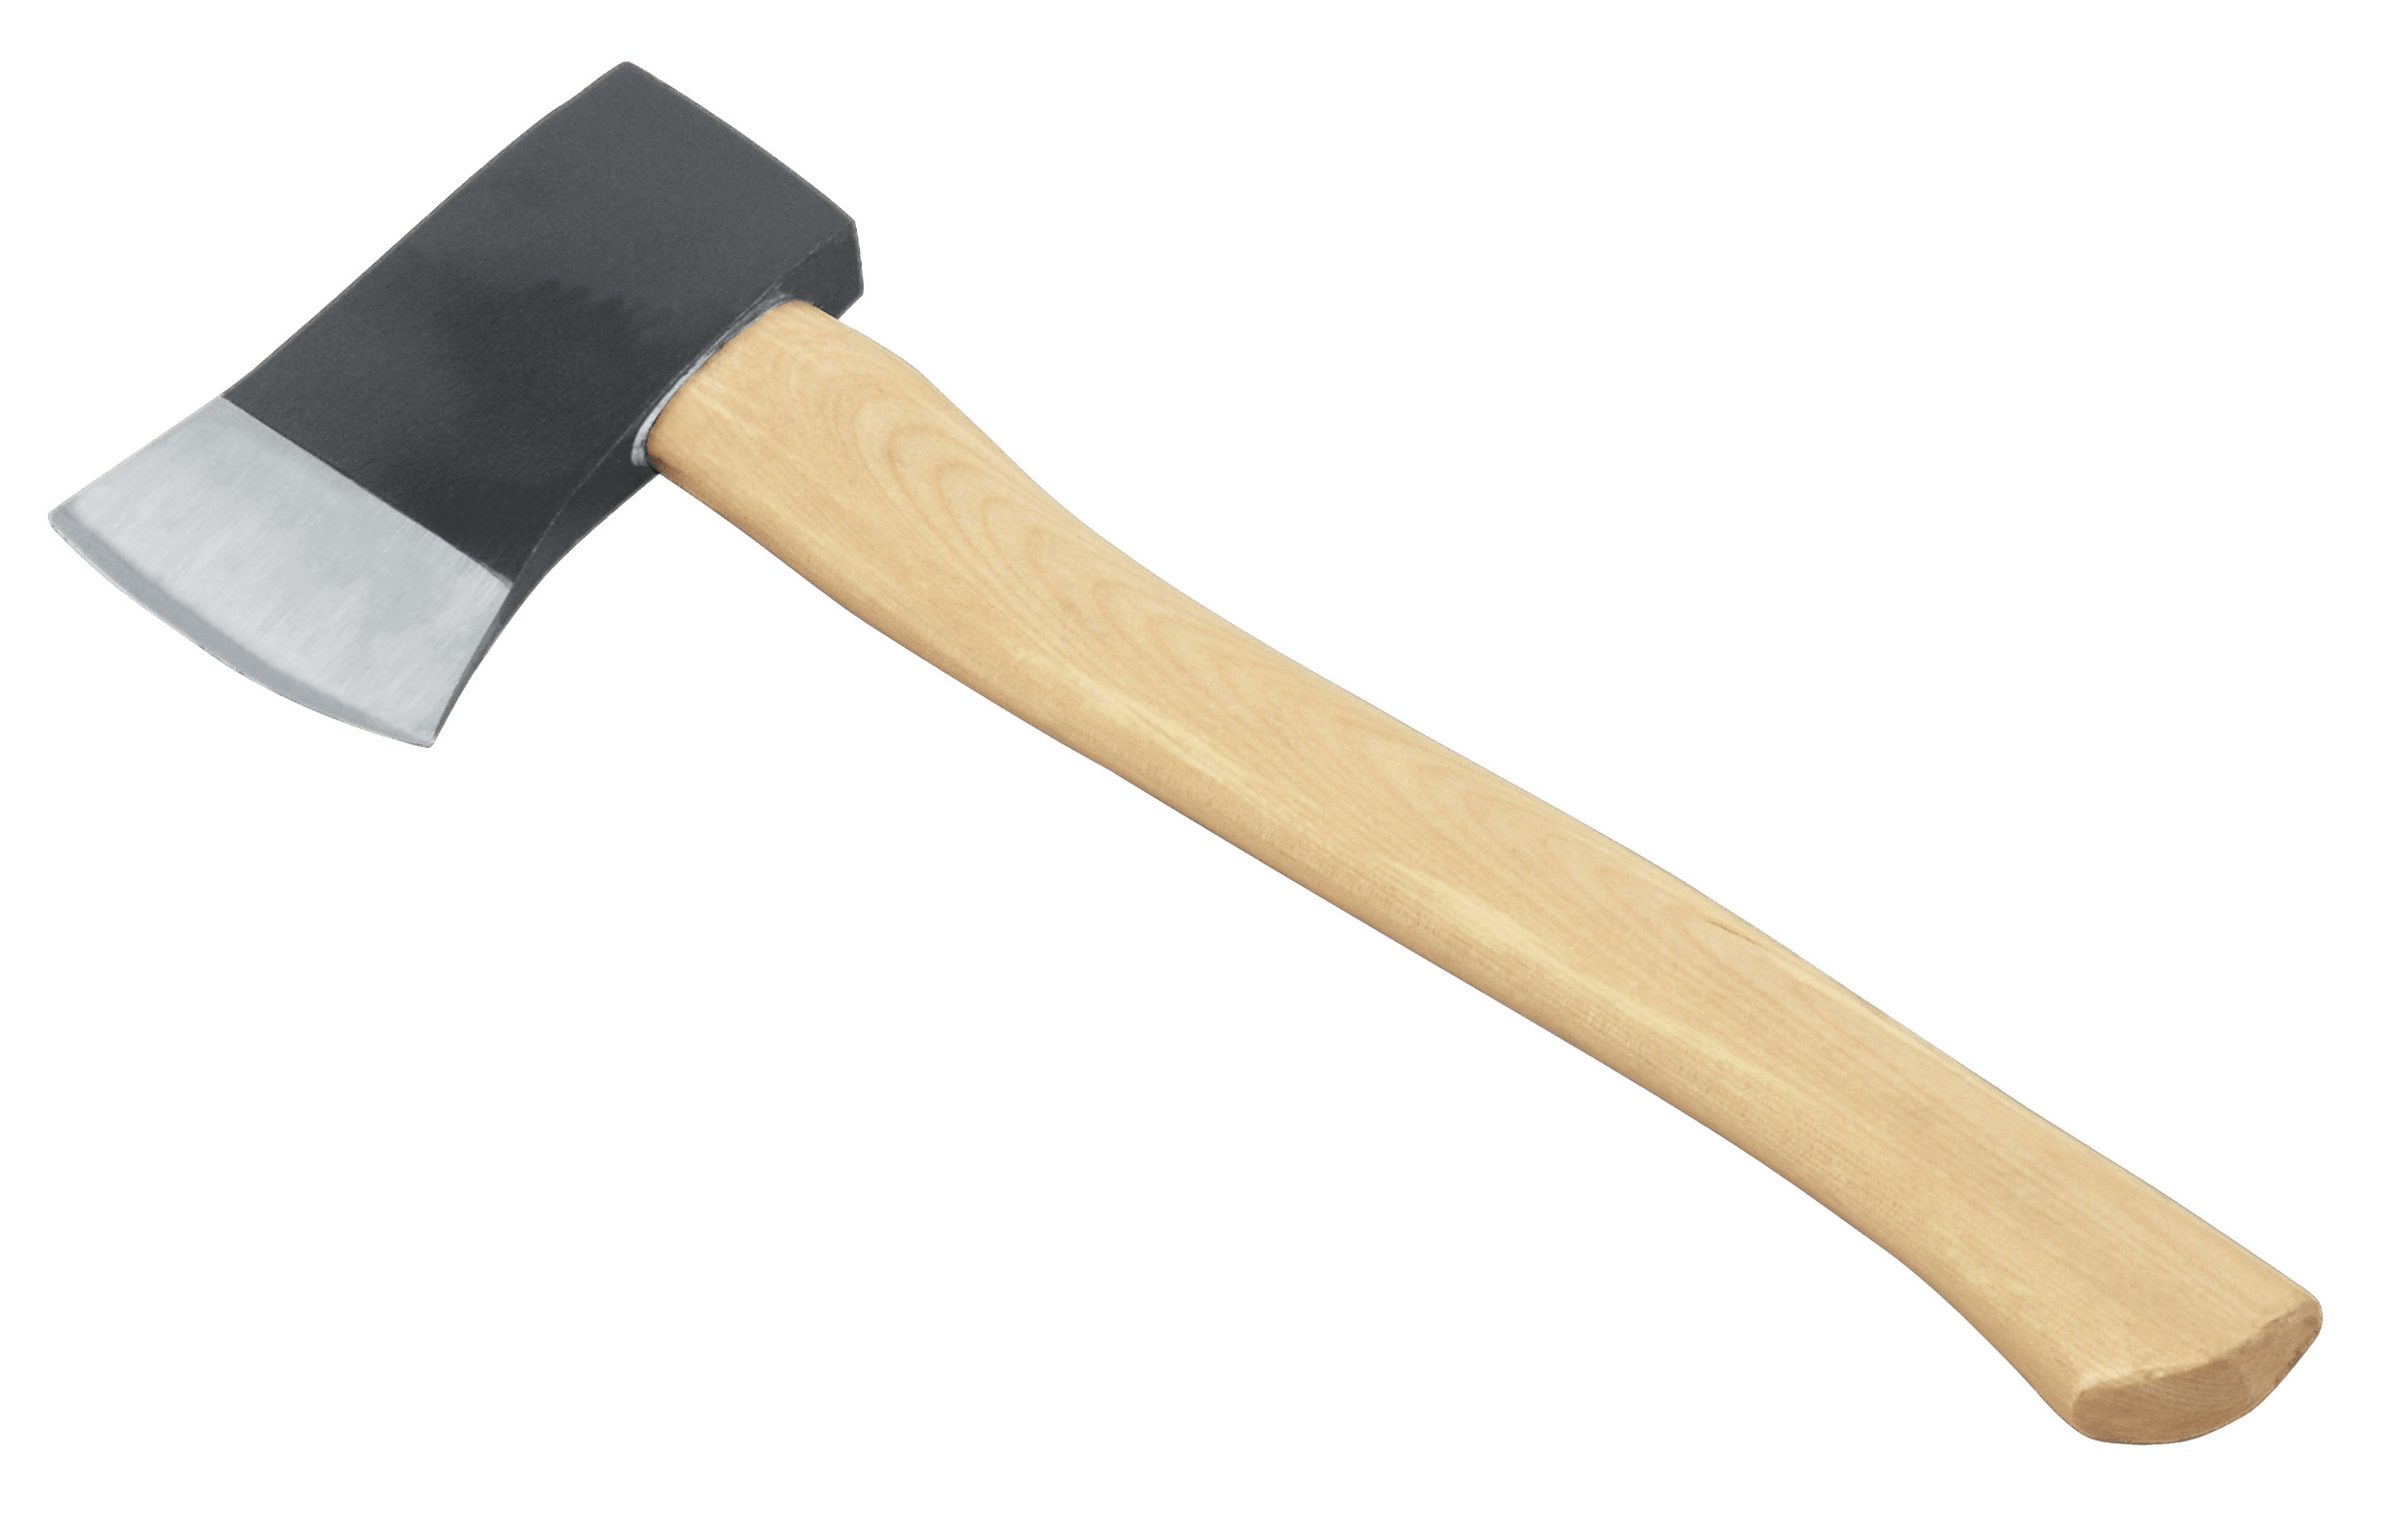 Axe Png Hd PNG Image